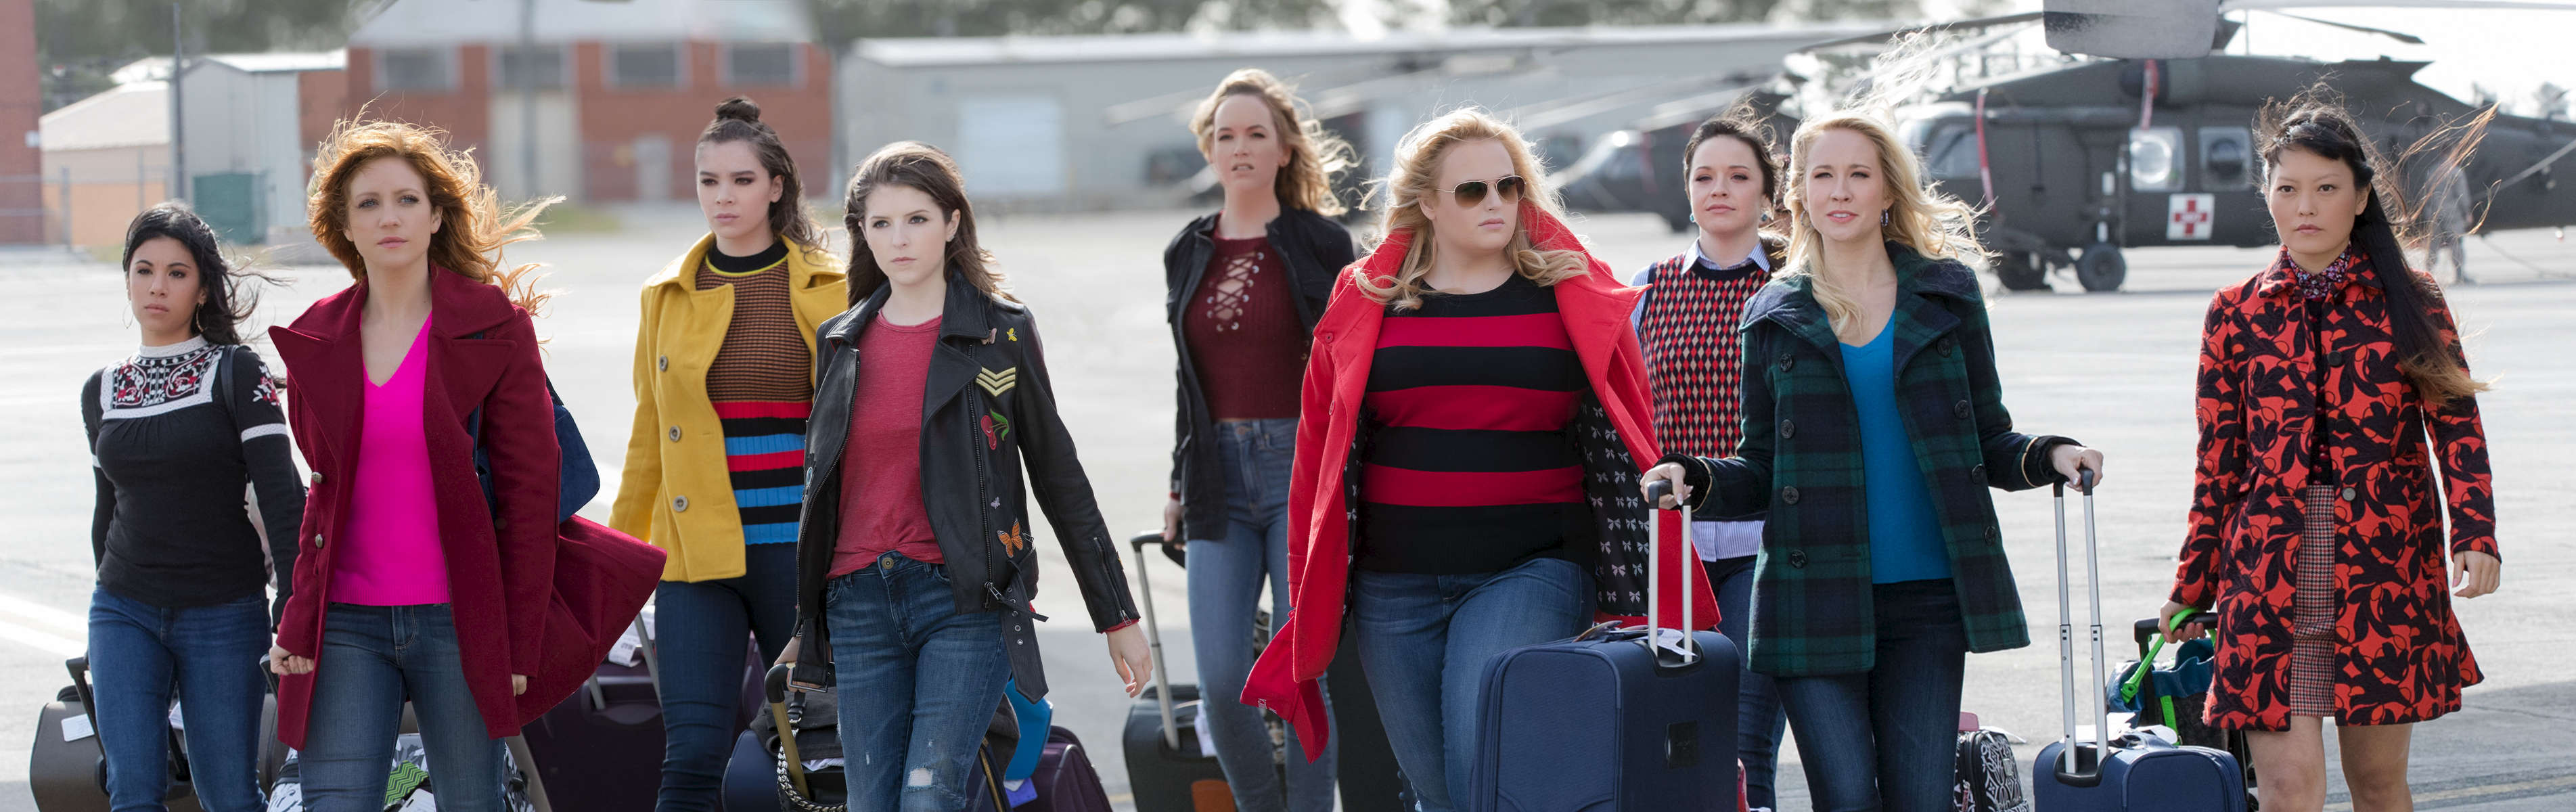 Pitch Perfect III